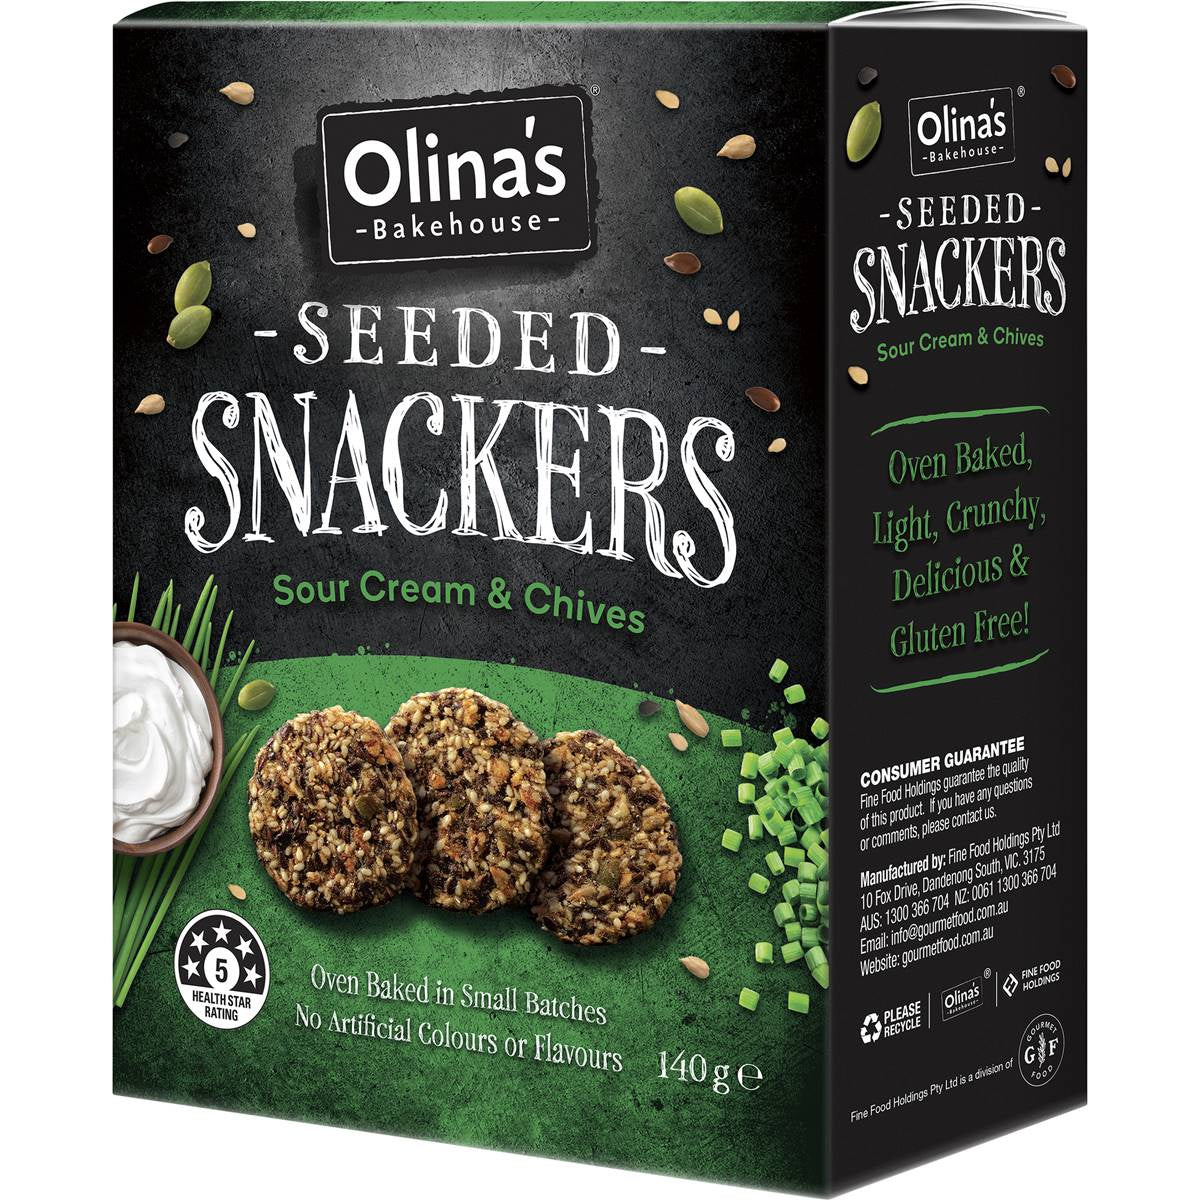 Olina's Seeded Snackers Sour Cream & Chives 140g